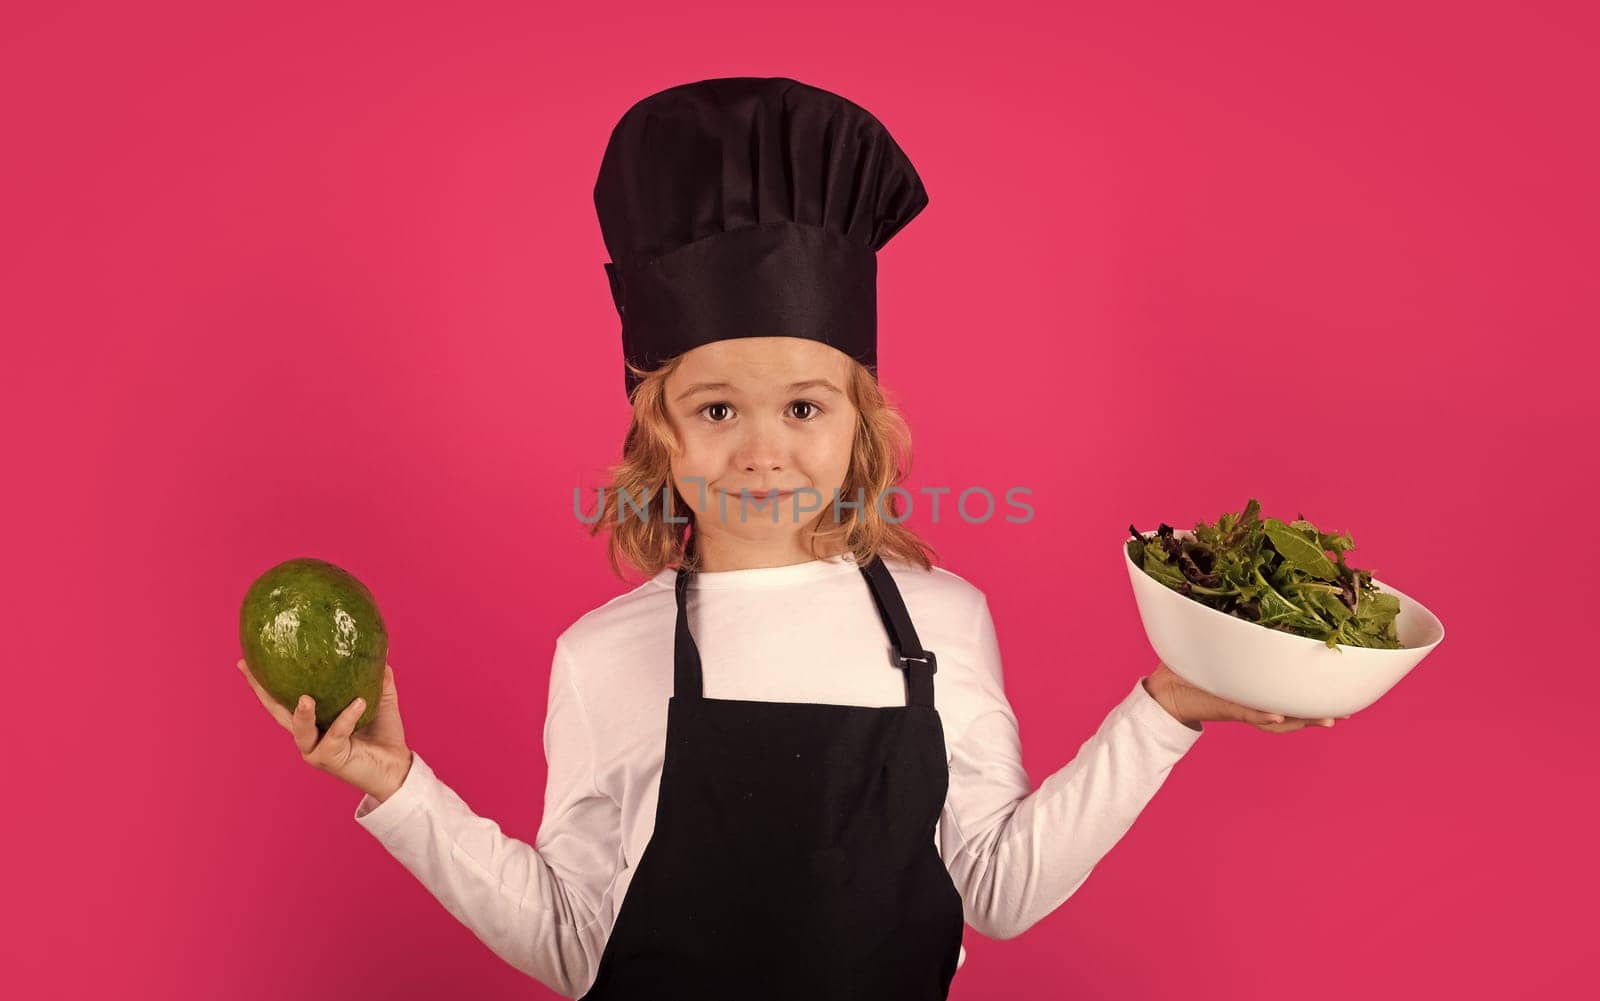 Funny child cook with avocado and vegetable. Child wearing cooker uniform and chef hat preparing food on kitchen, studio portrait. Cooking, culinary and kids food concept